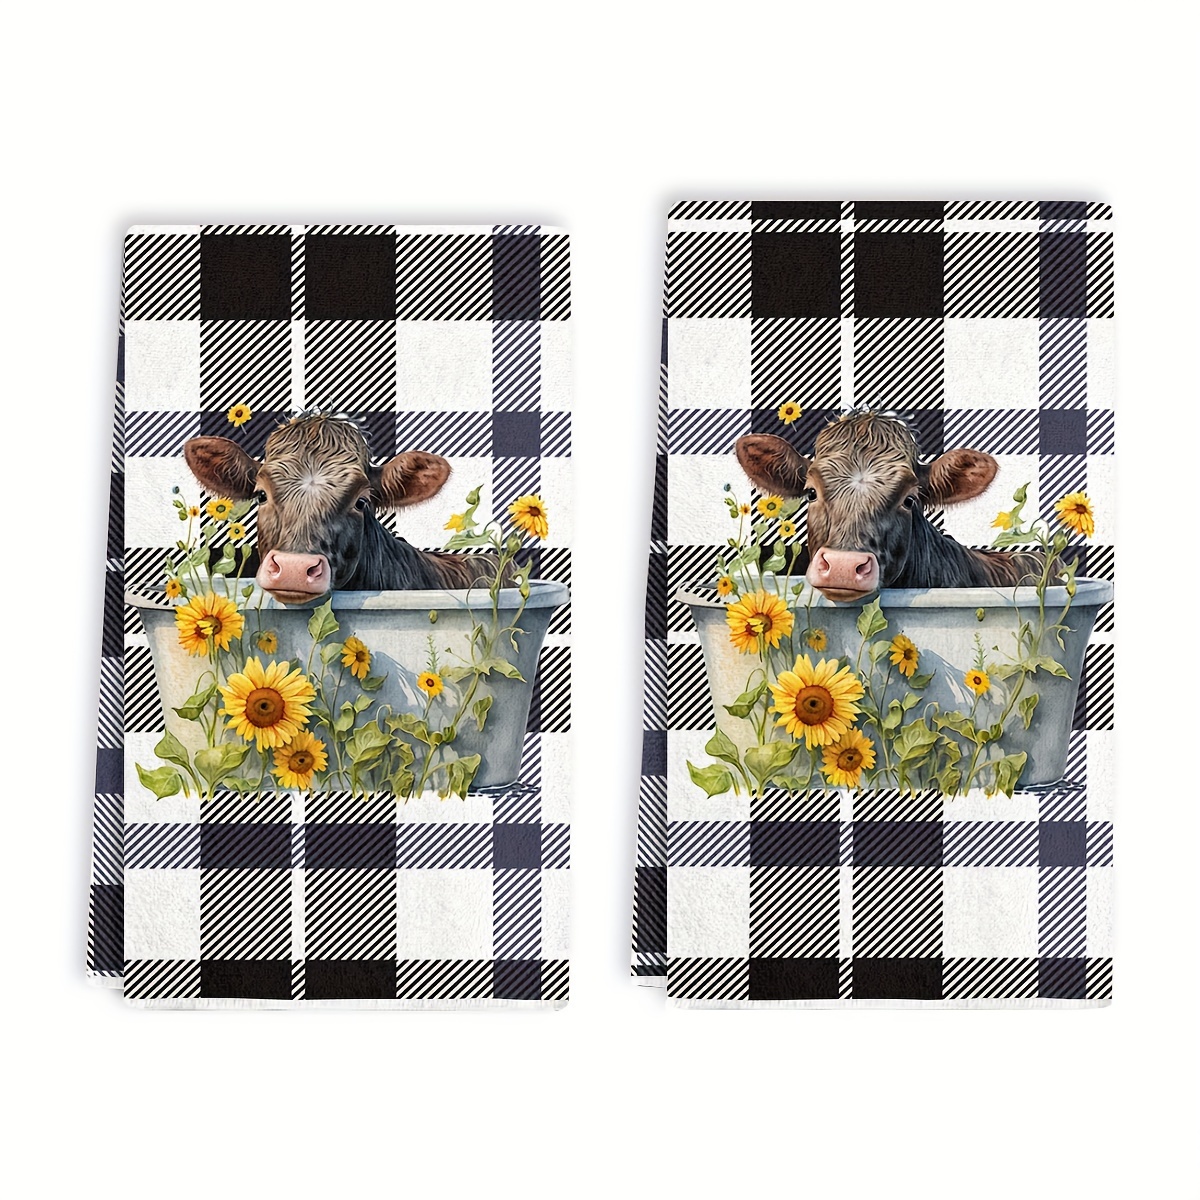 

2pcs Dish Cloths, Sunflower Cow Kitchen Hand Towels, Contemporary Ultra-fine Microfiber, Absorbent Dish Cloths, Tea Towels For Cooking, Baking And Cleaning, Home Supplies